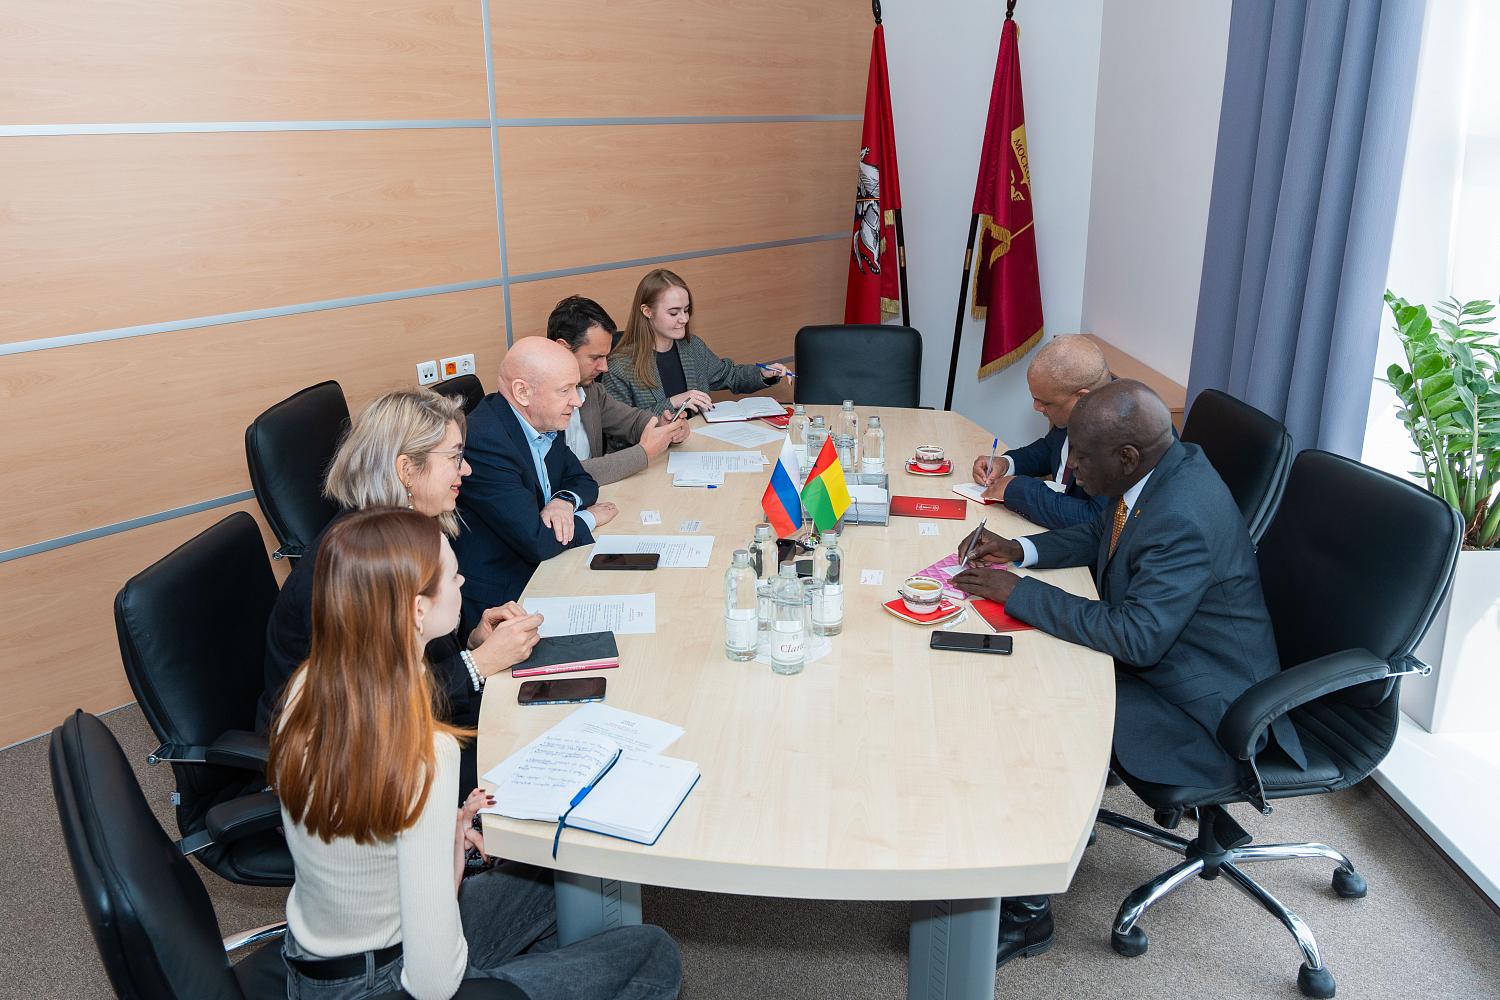 The MCCI discussed possible areas of cooperation with Guinea-Bissau